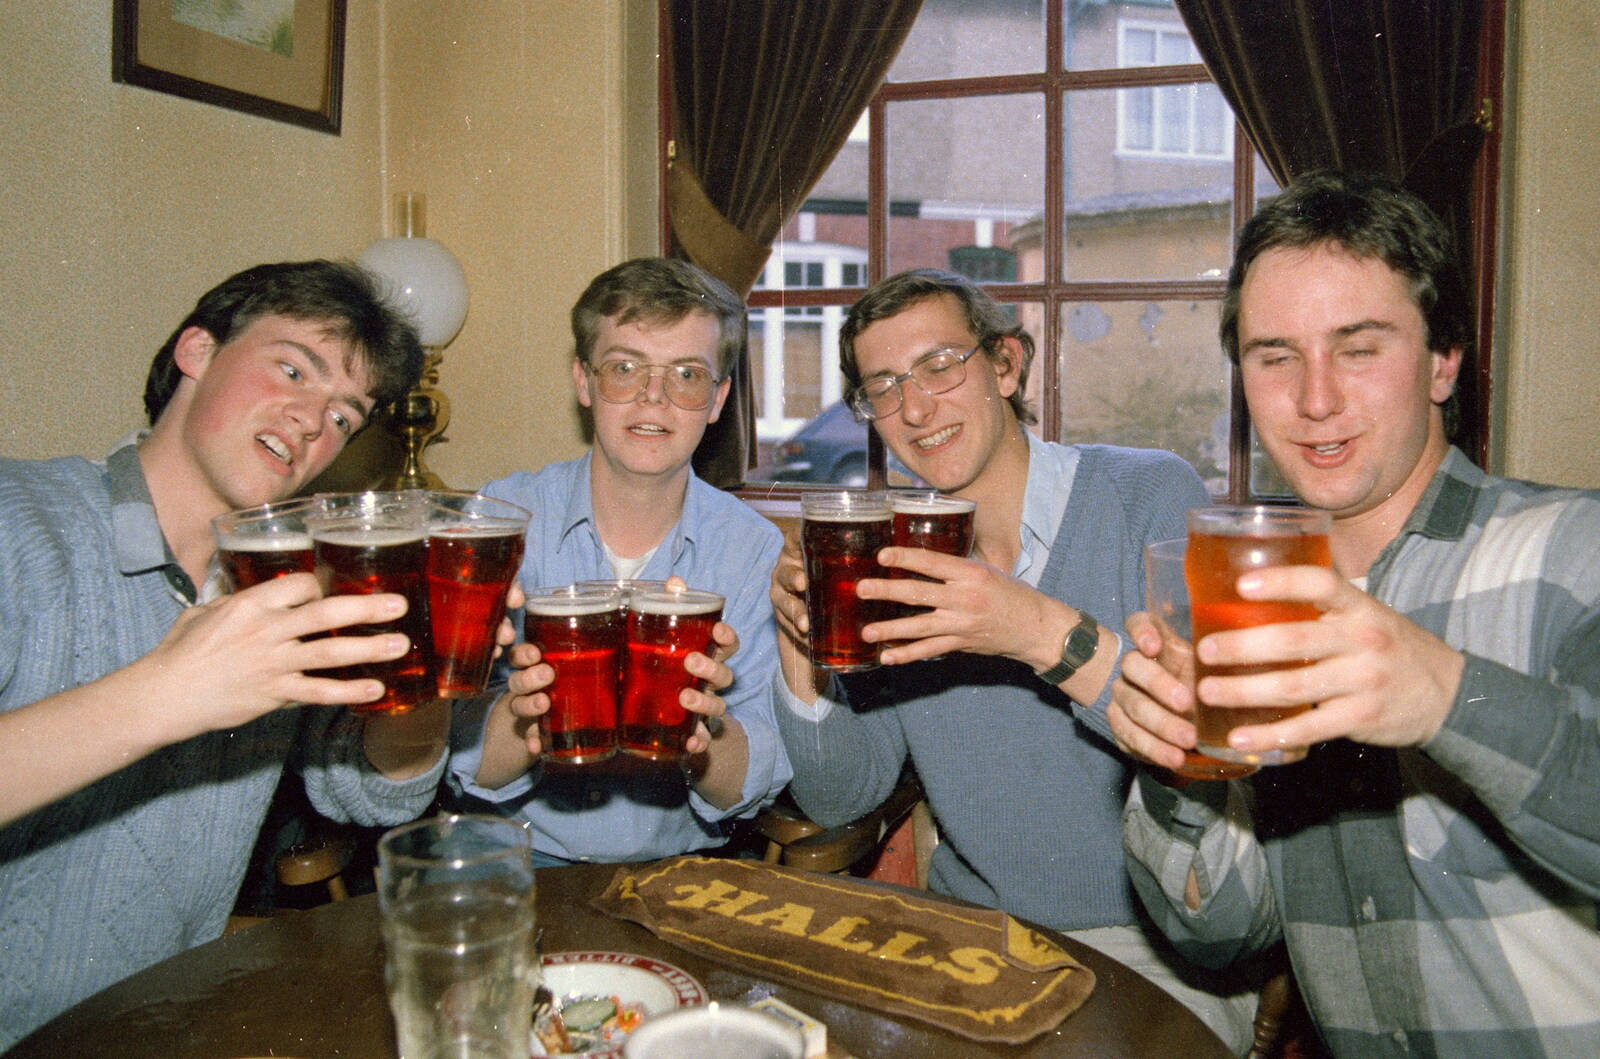 The lads get another round in from Uni: Neath Road and a JSV Happy Hour, Plymouth - 15th May 1986